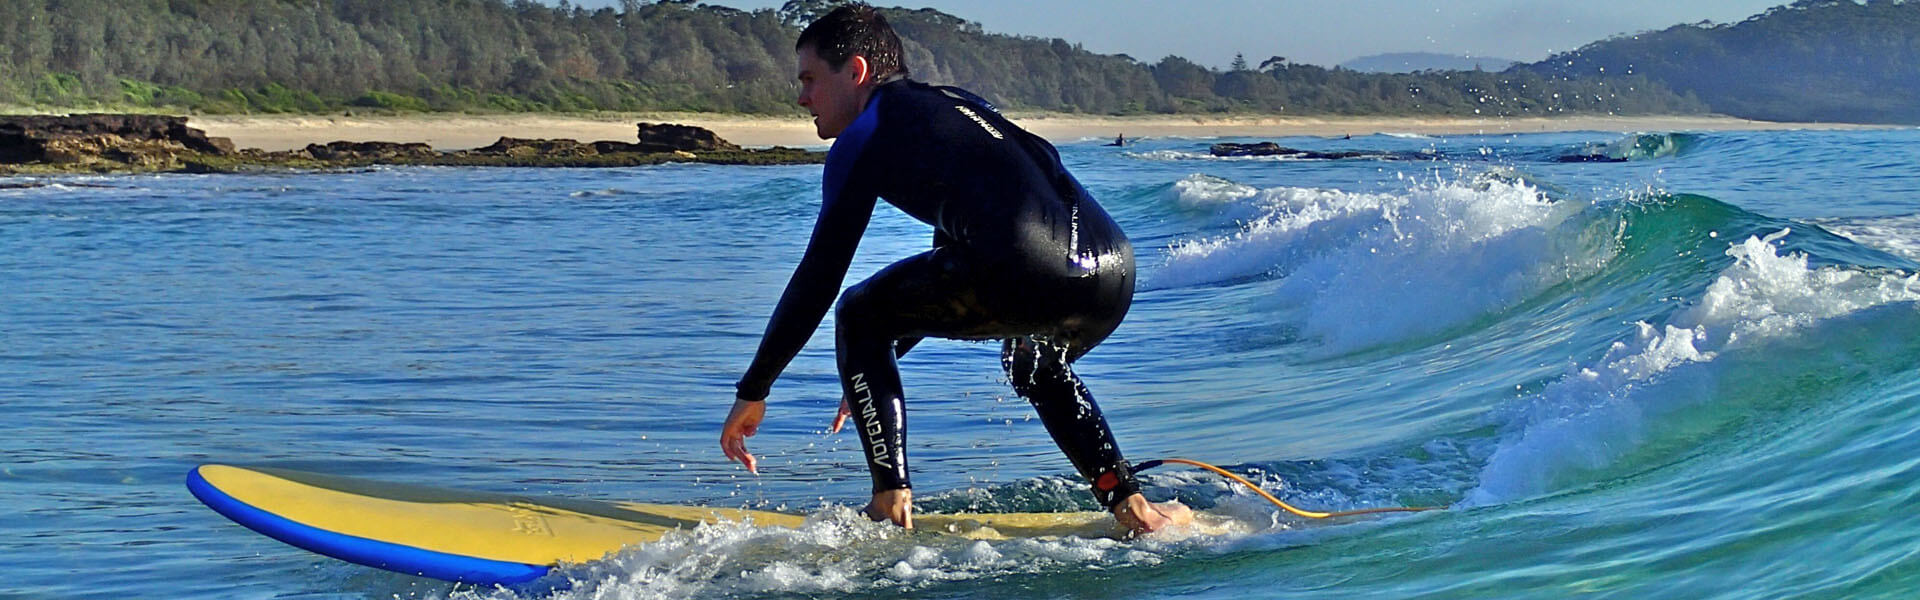 Man in wetsuit on surfboard riding a wave